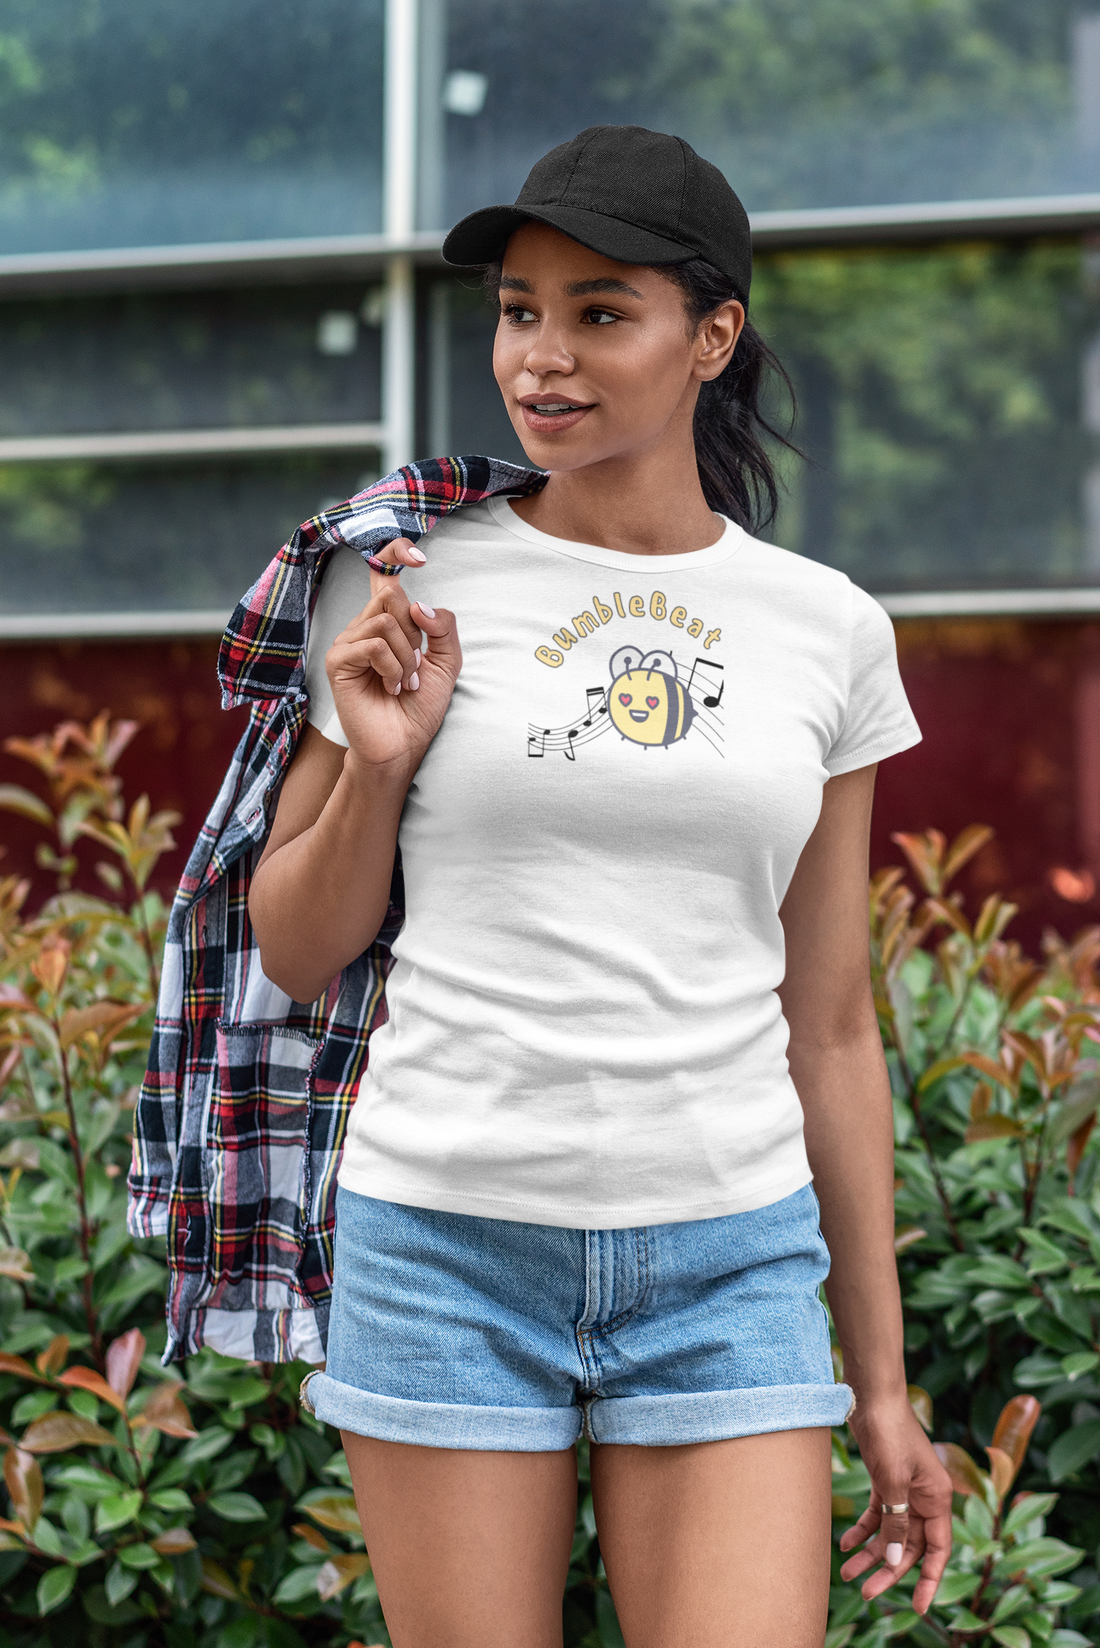 A female wearing a white music tshirt design with the text "bumblebeat" and a bumblebee buzzing to music